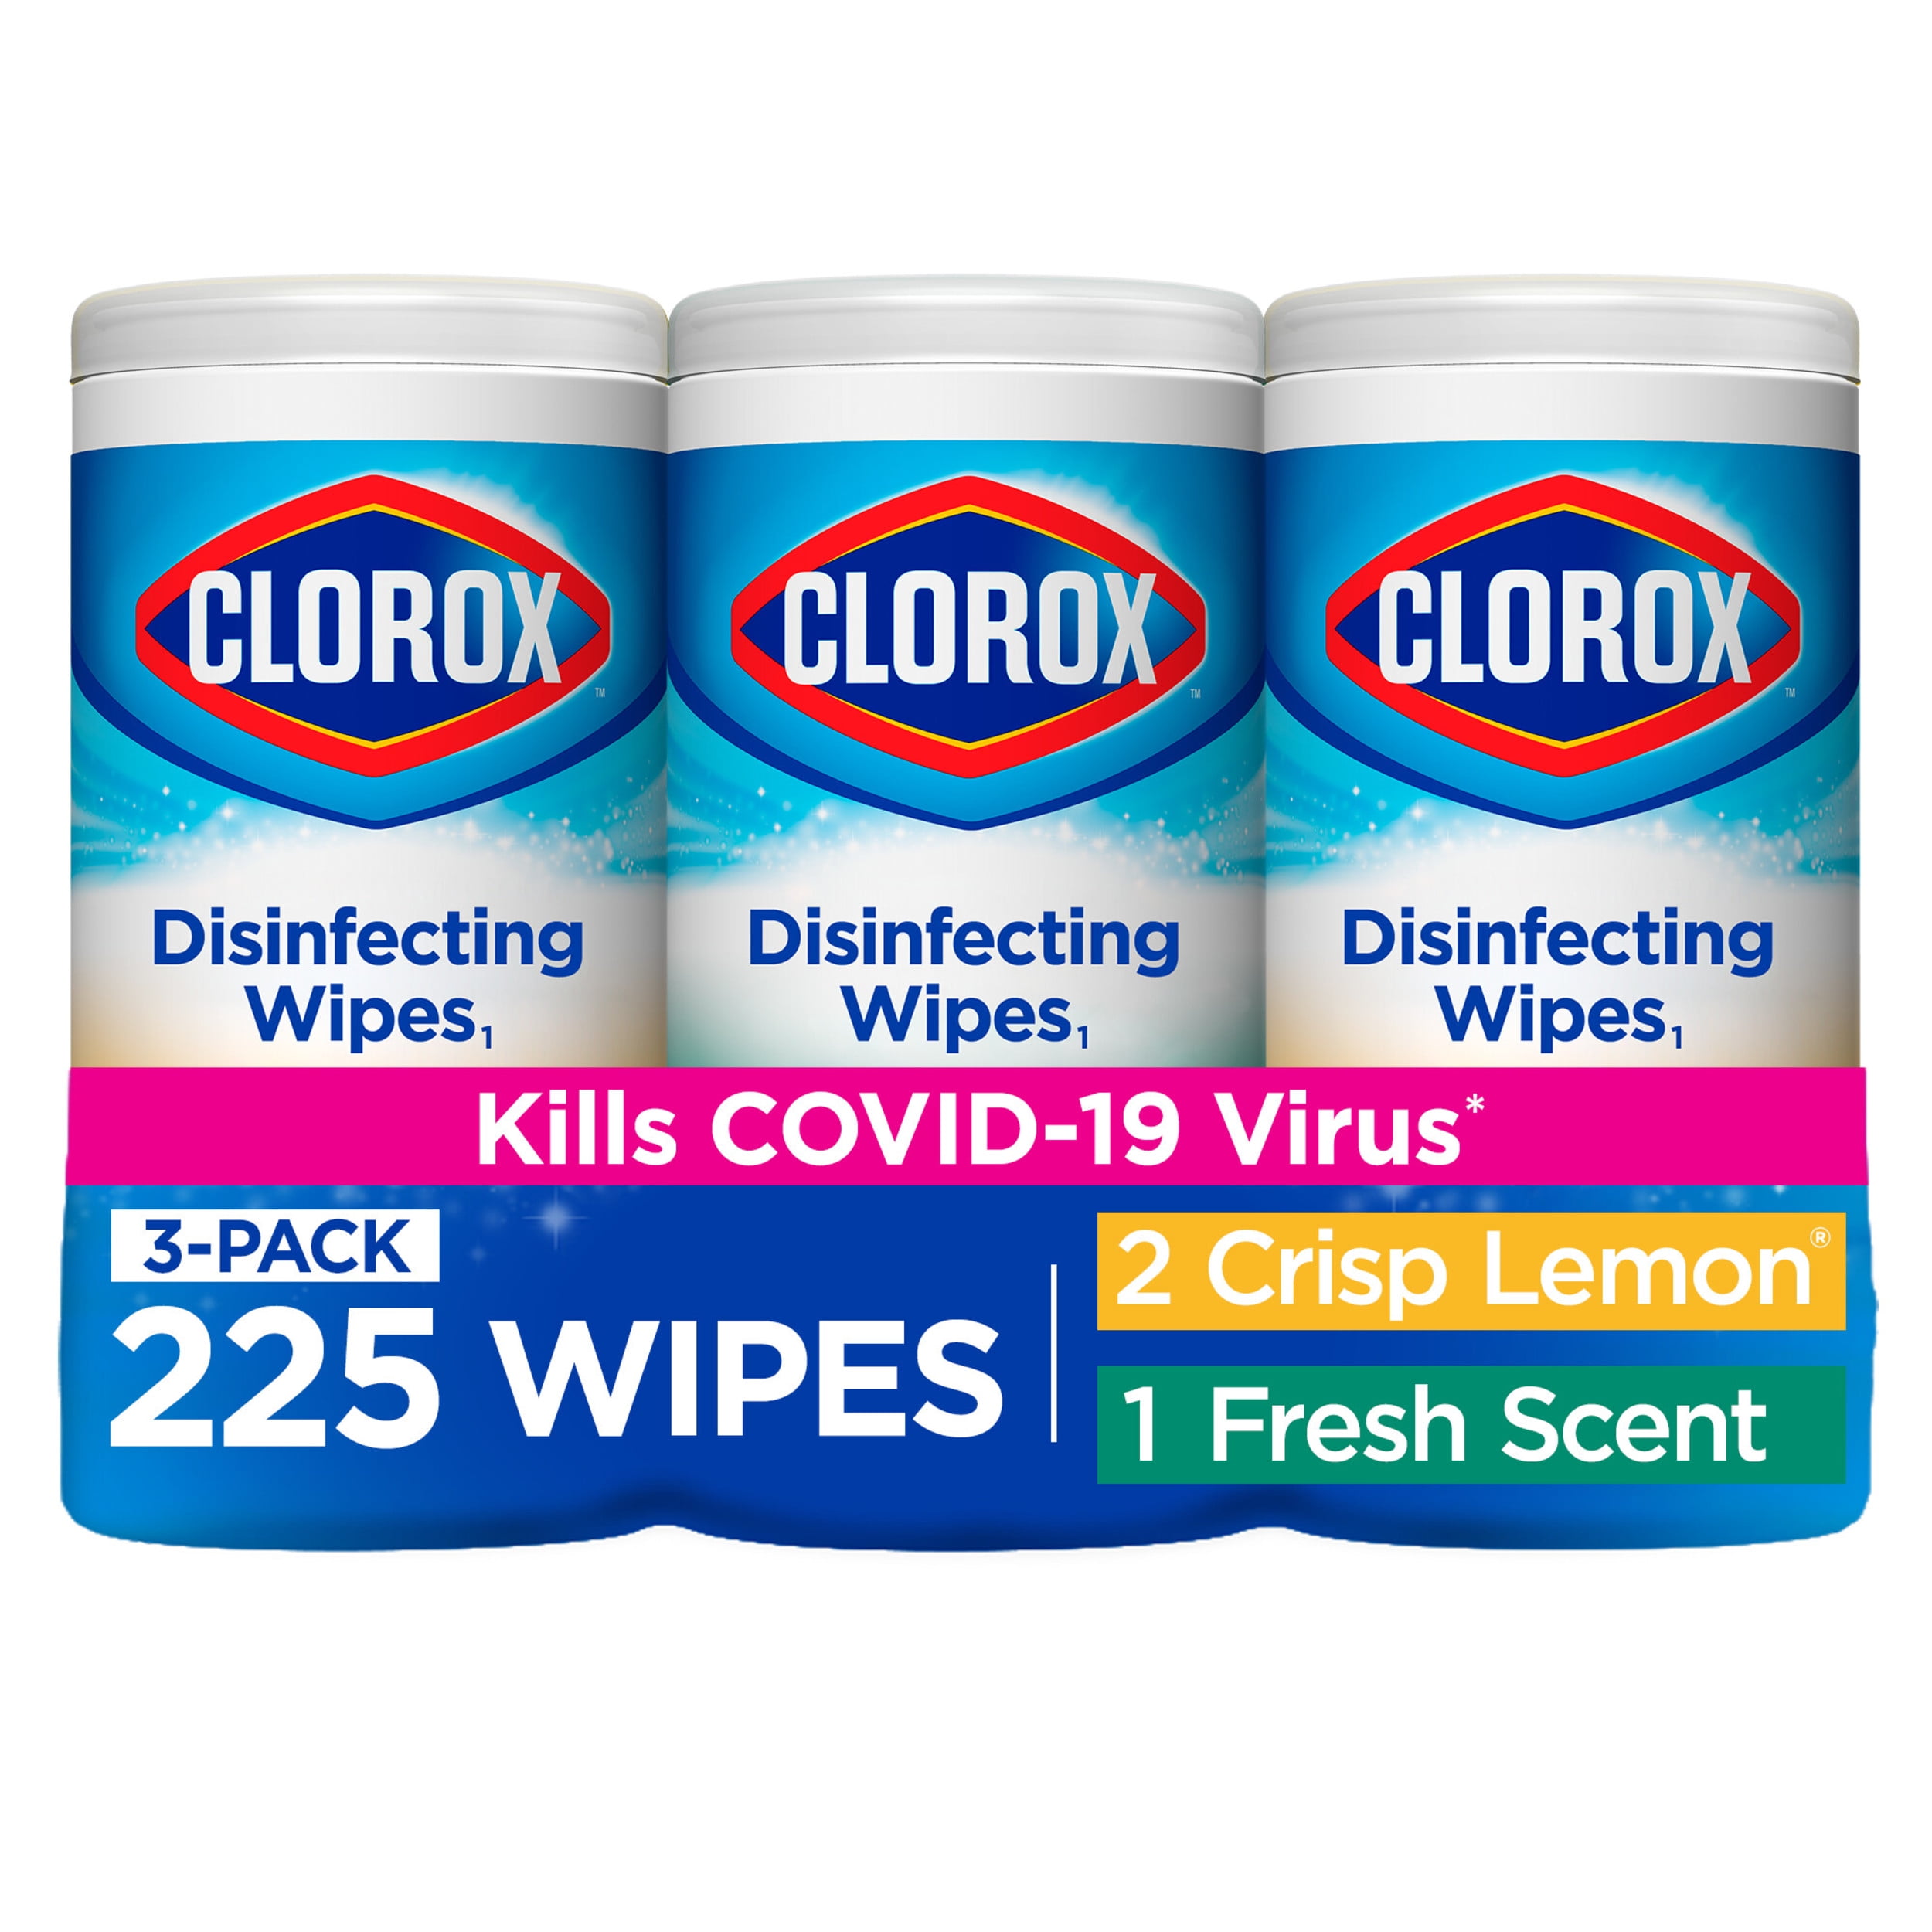 Clorox Disinfecting Wipes, Cleaning Wipes, Crisp Lemon, 75 Count